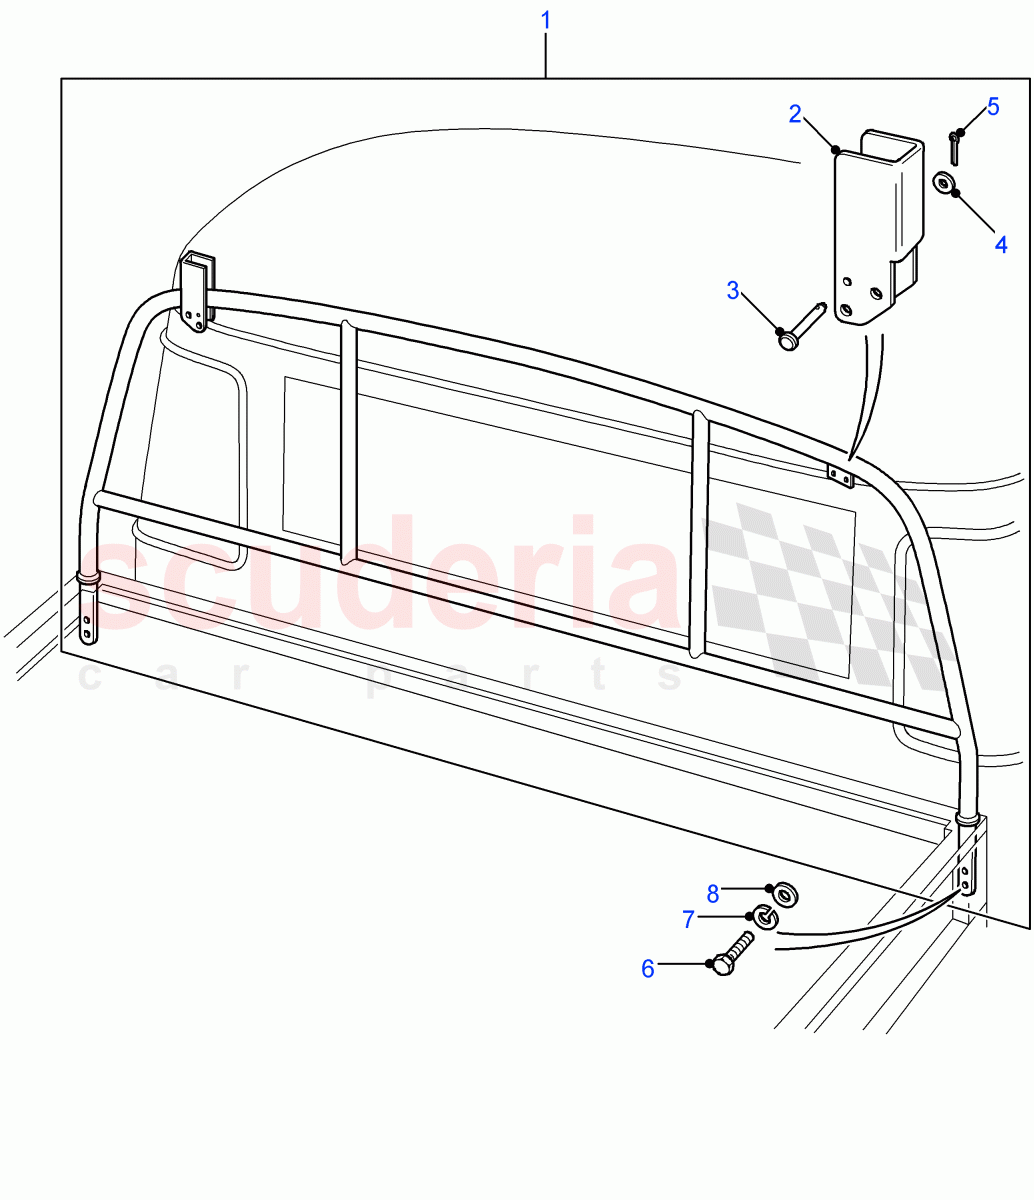 Ladder Rack(High Capacity Pick Up,110" Wheelbase,Crew Cab HCPU,130" Wheelbase)((V)FROM7A000001) of Land Rover Land Rover Defender (2007-2016)